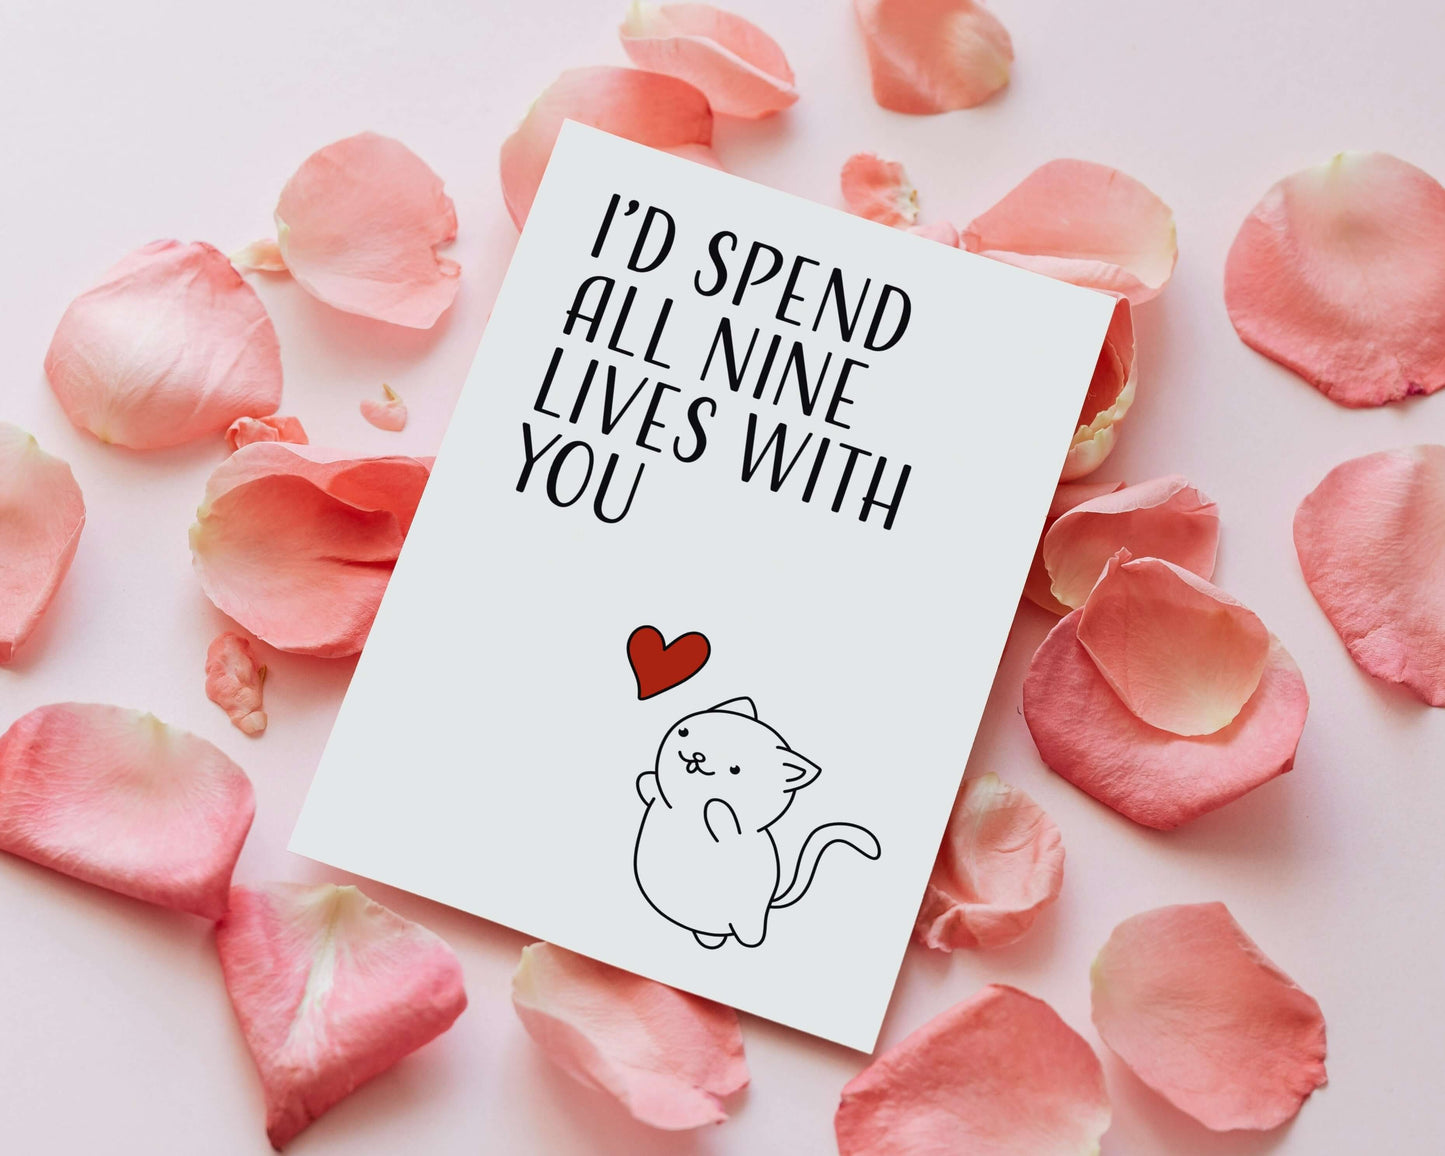 The Card Store UK's I'd Spend All Nine Lives With You | Funny Love General Blank Everyday Card | Cat Pun Greeting Card, Love Cards for £3.50 each